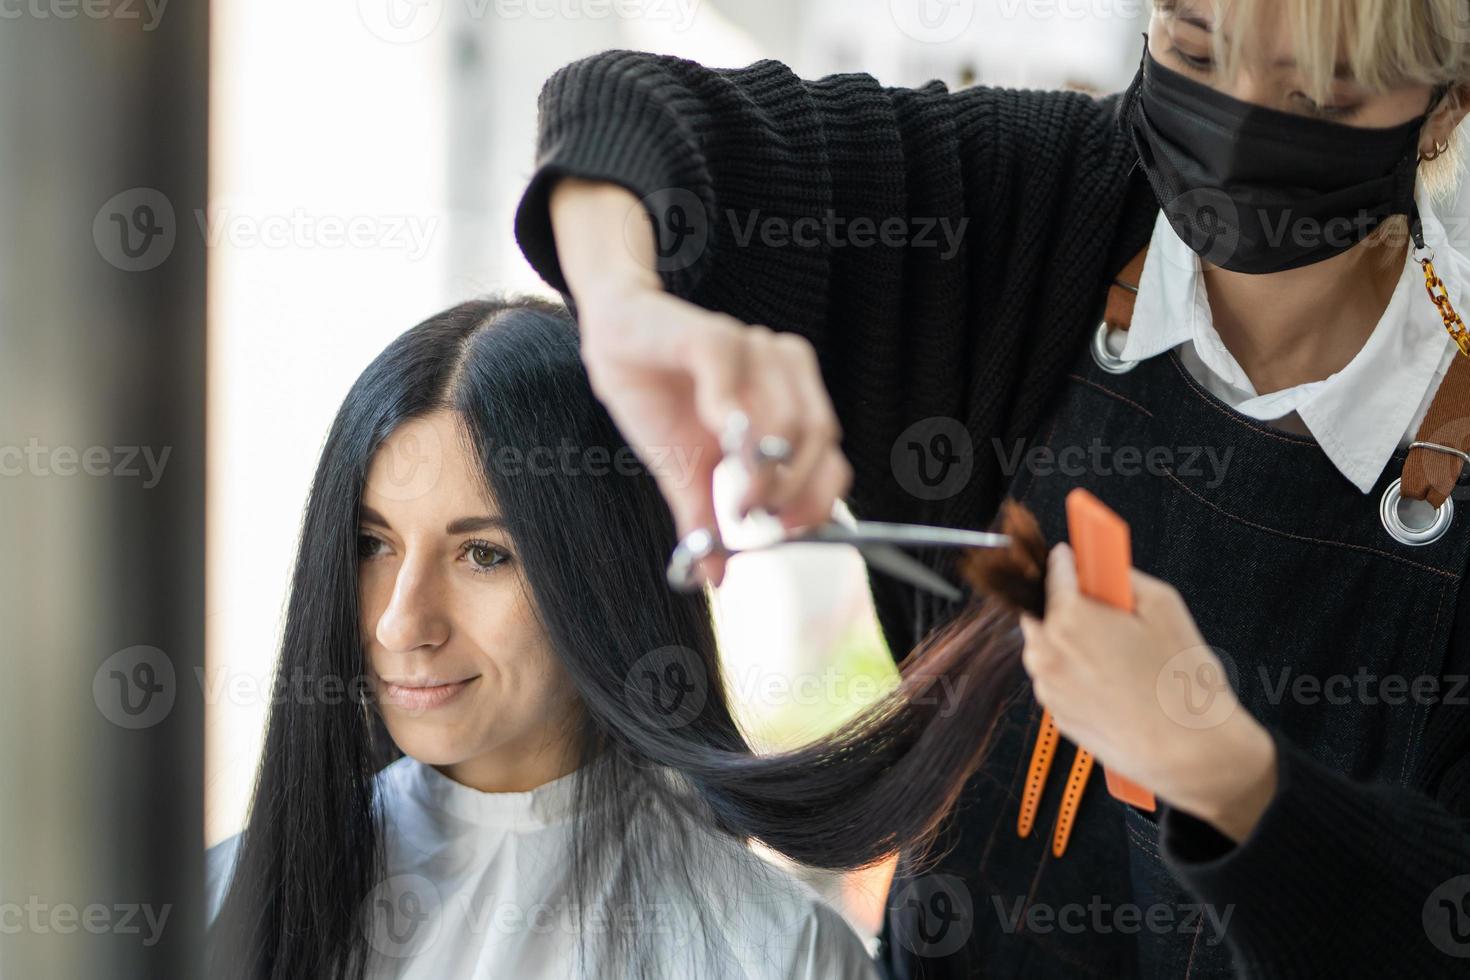 Caucasian women with Hair stylish while do hair cut and wearing surgical face mask while styling hair for client. Professional occupation, beauty and fashion service new normal photo